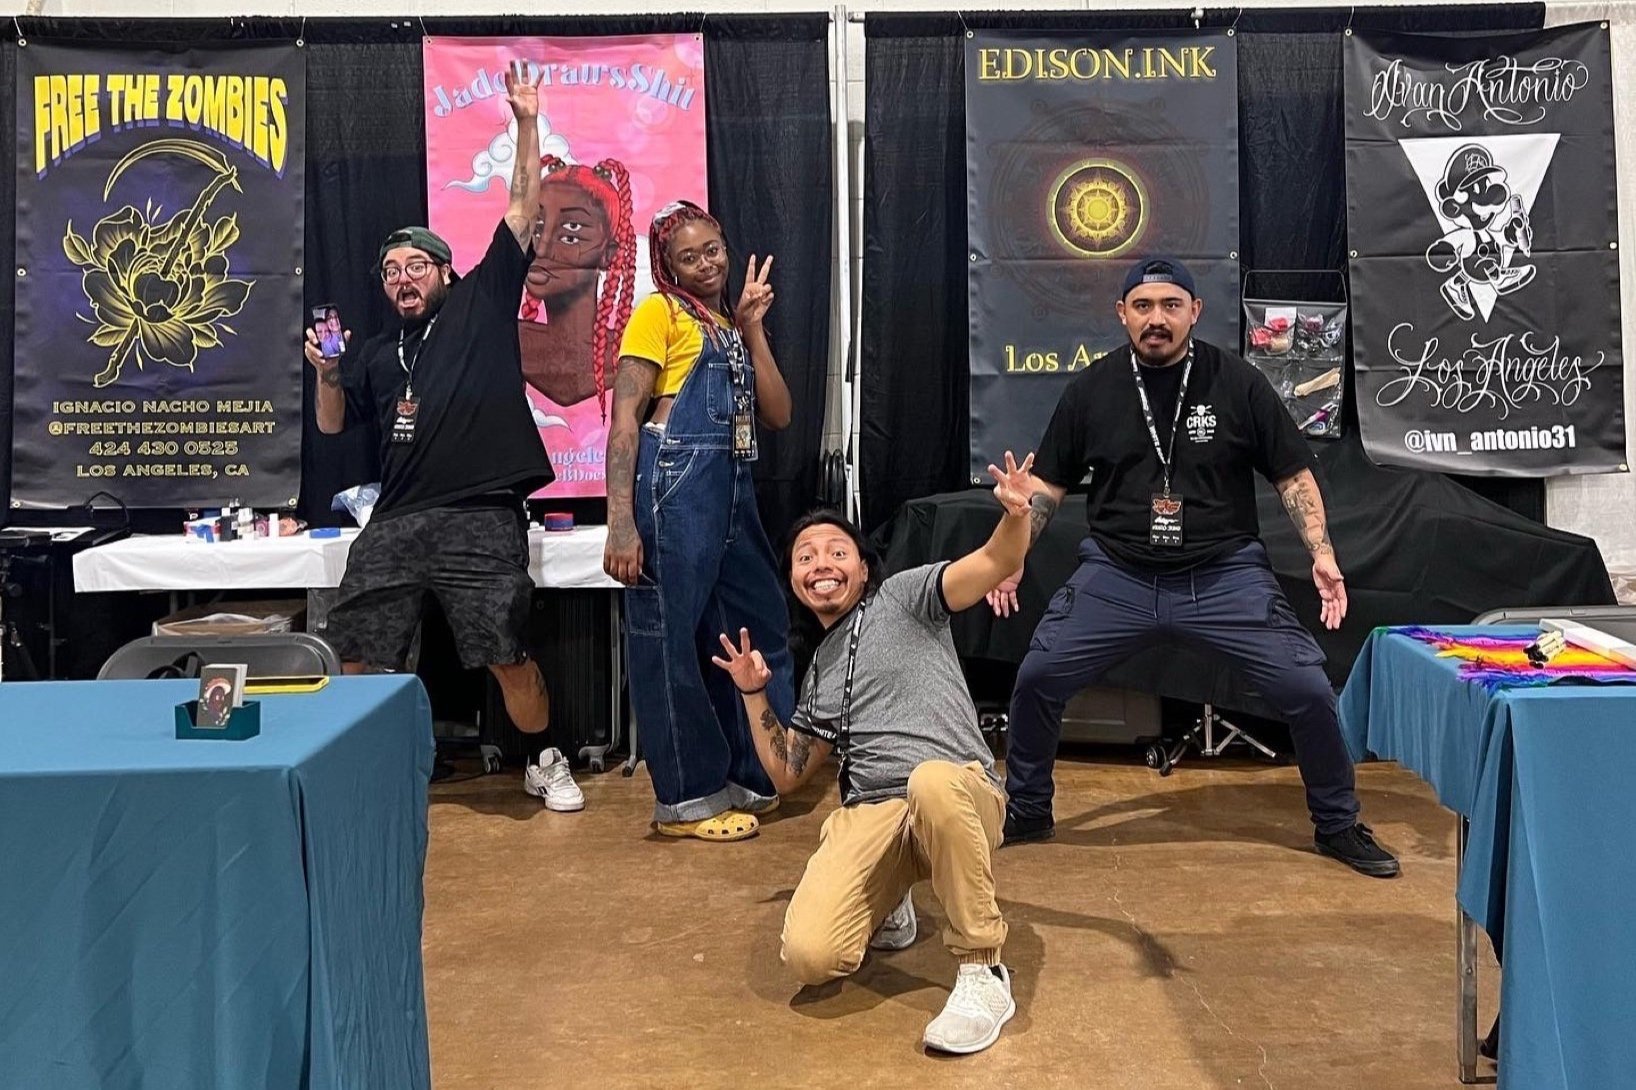 The Gang out at the Dallas Tattoo Convention 